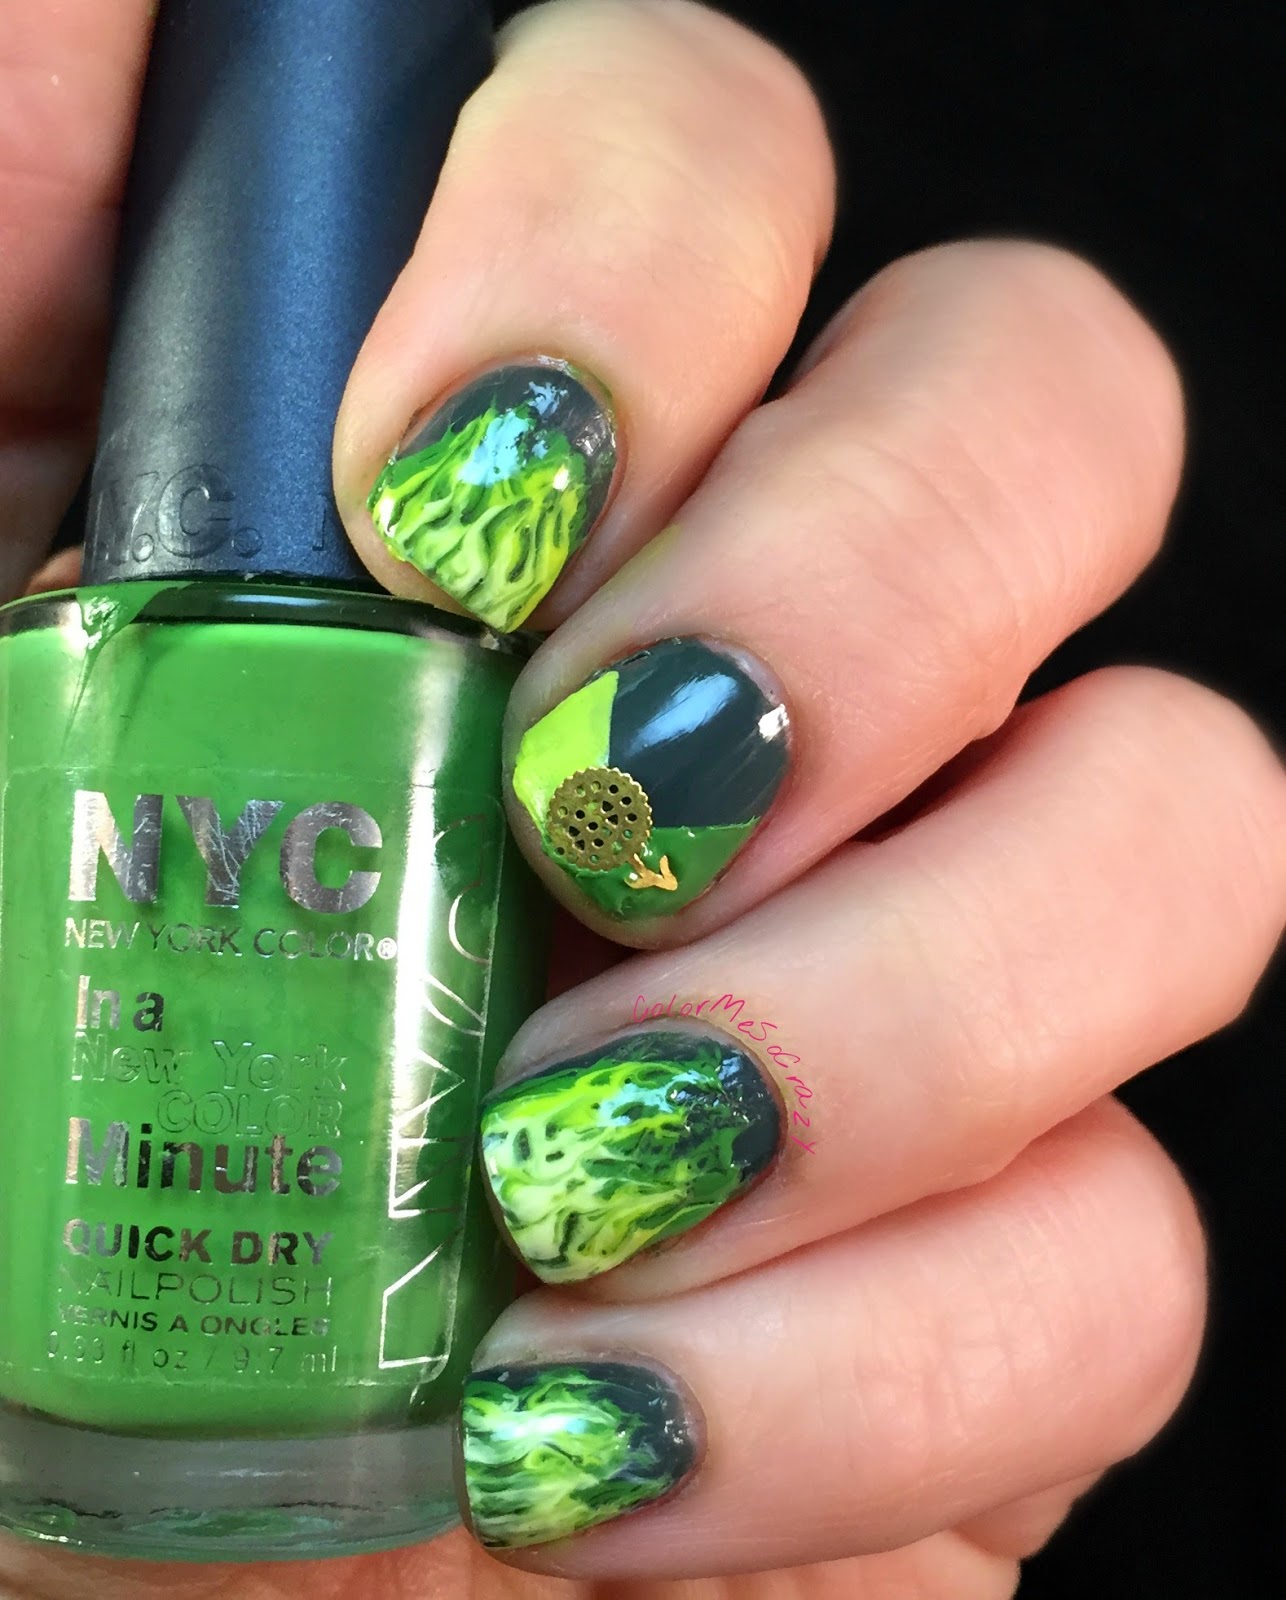 52 Week Challenge presents Fire with 3 Shades of Green, nyc, new york color, sinful colors, sally hansen